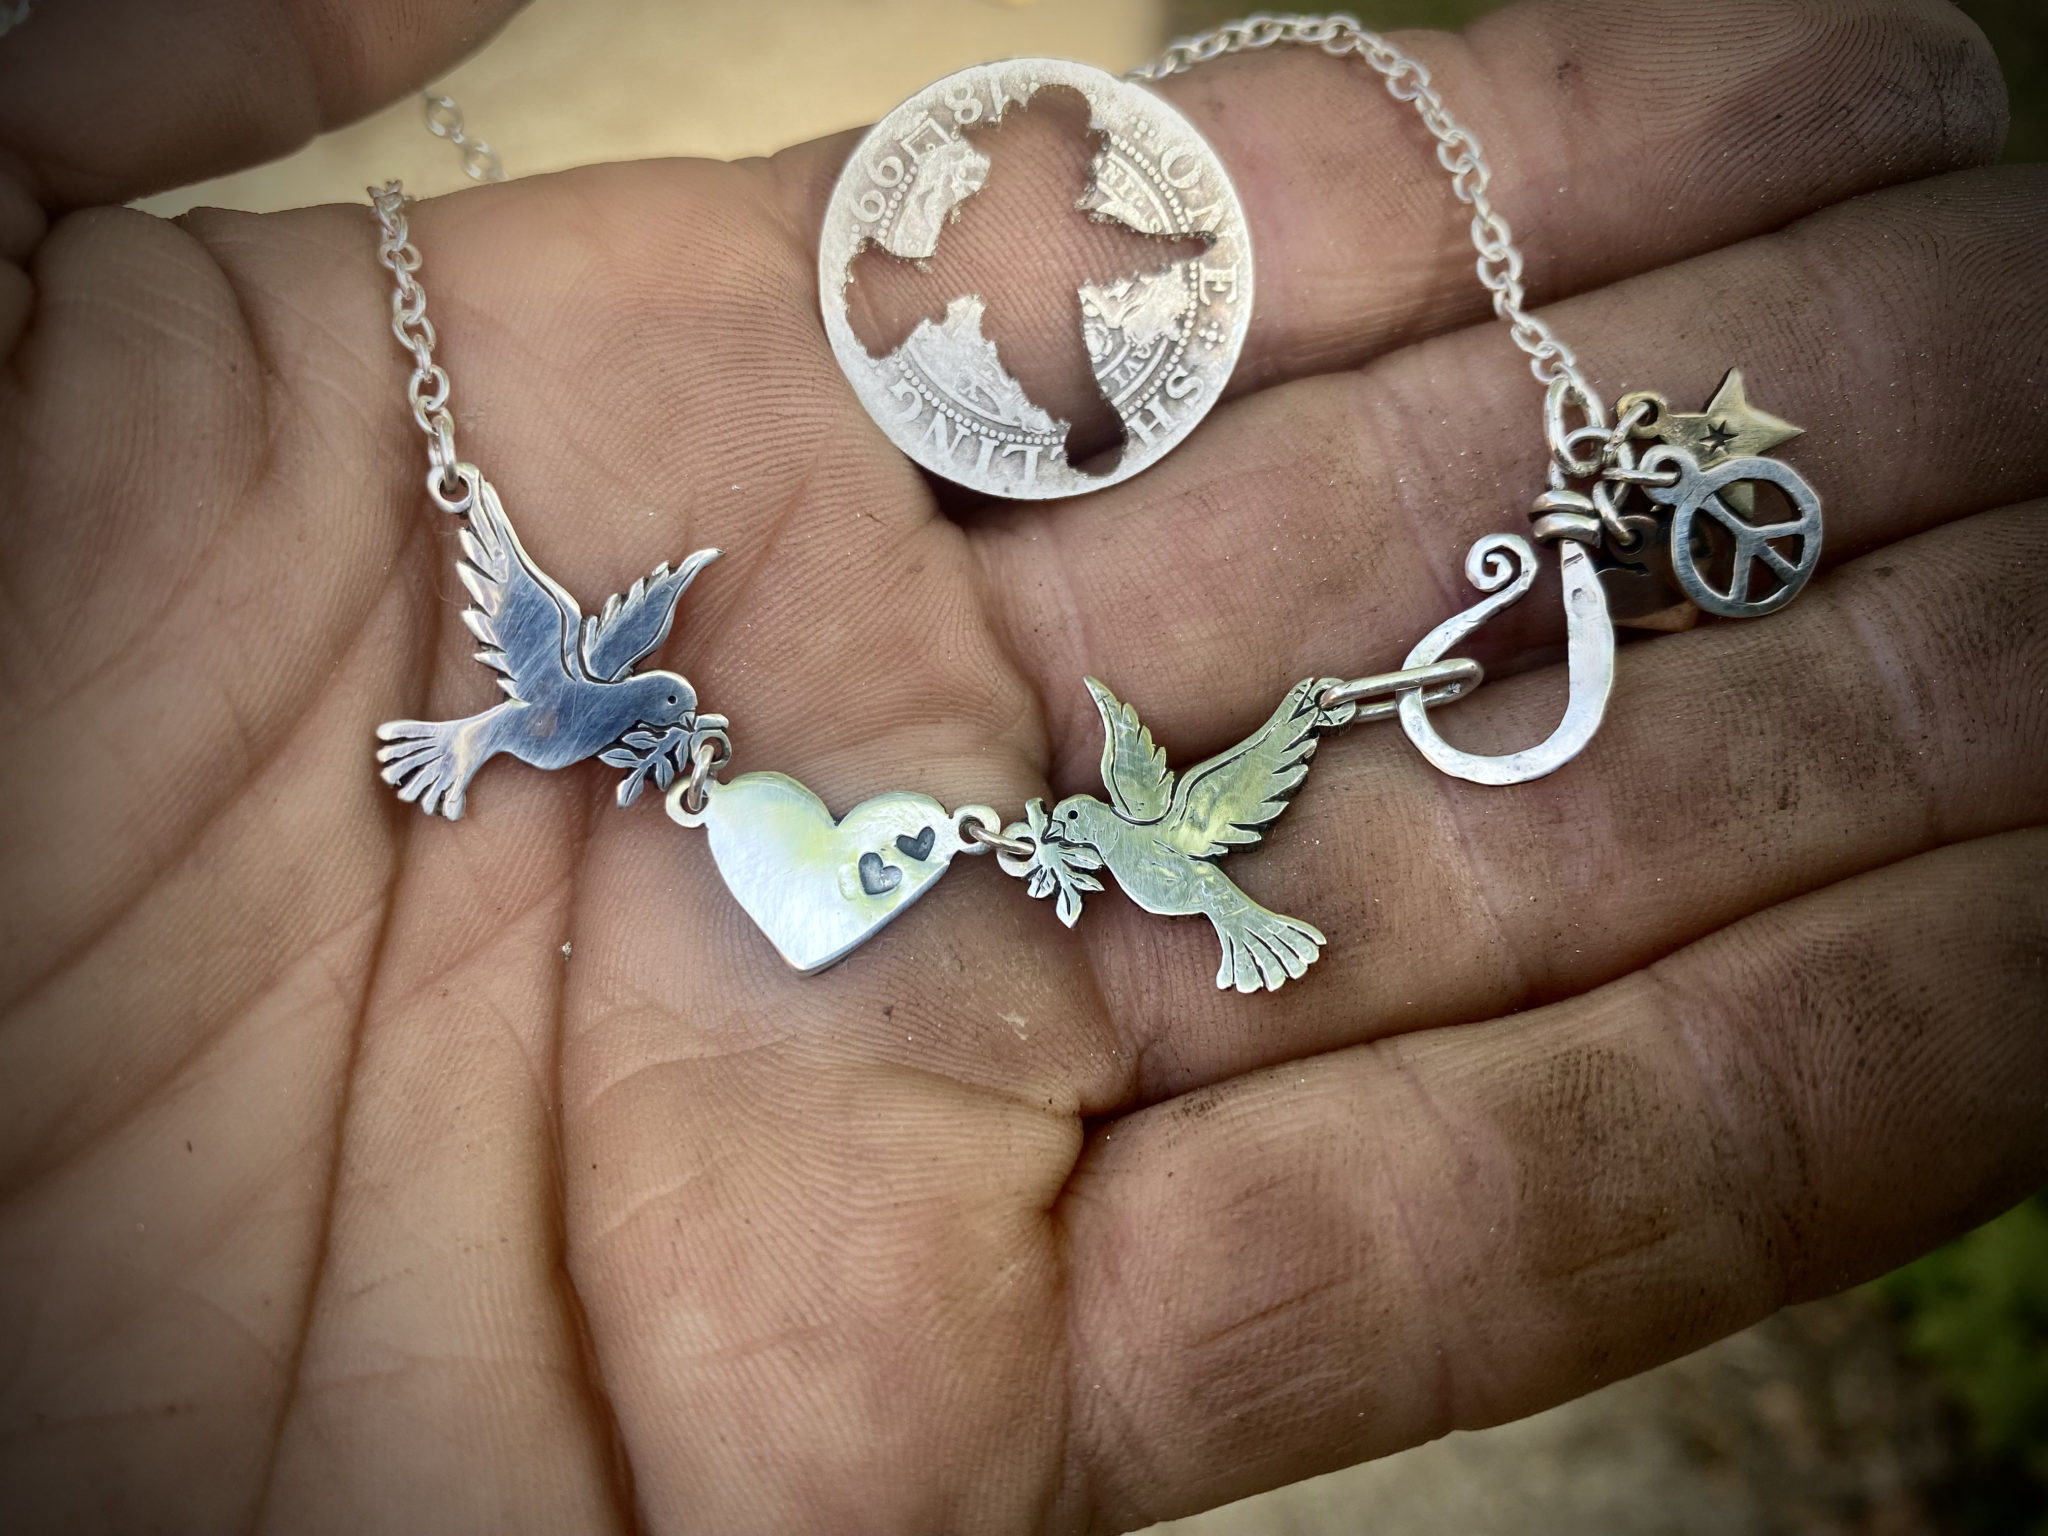 Love dove jewellery - handmade, ethical, Recycled 100 year old silver coins